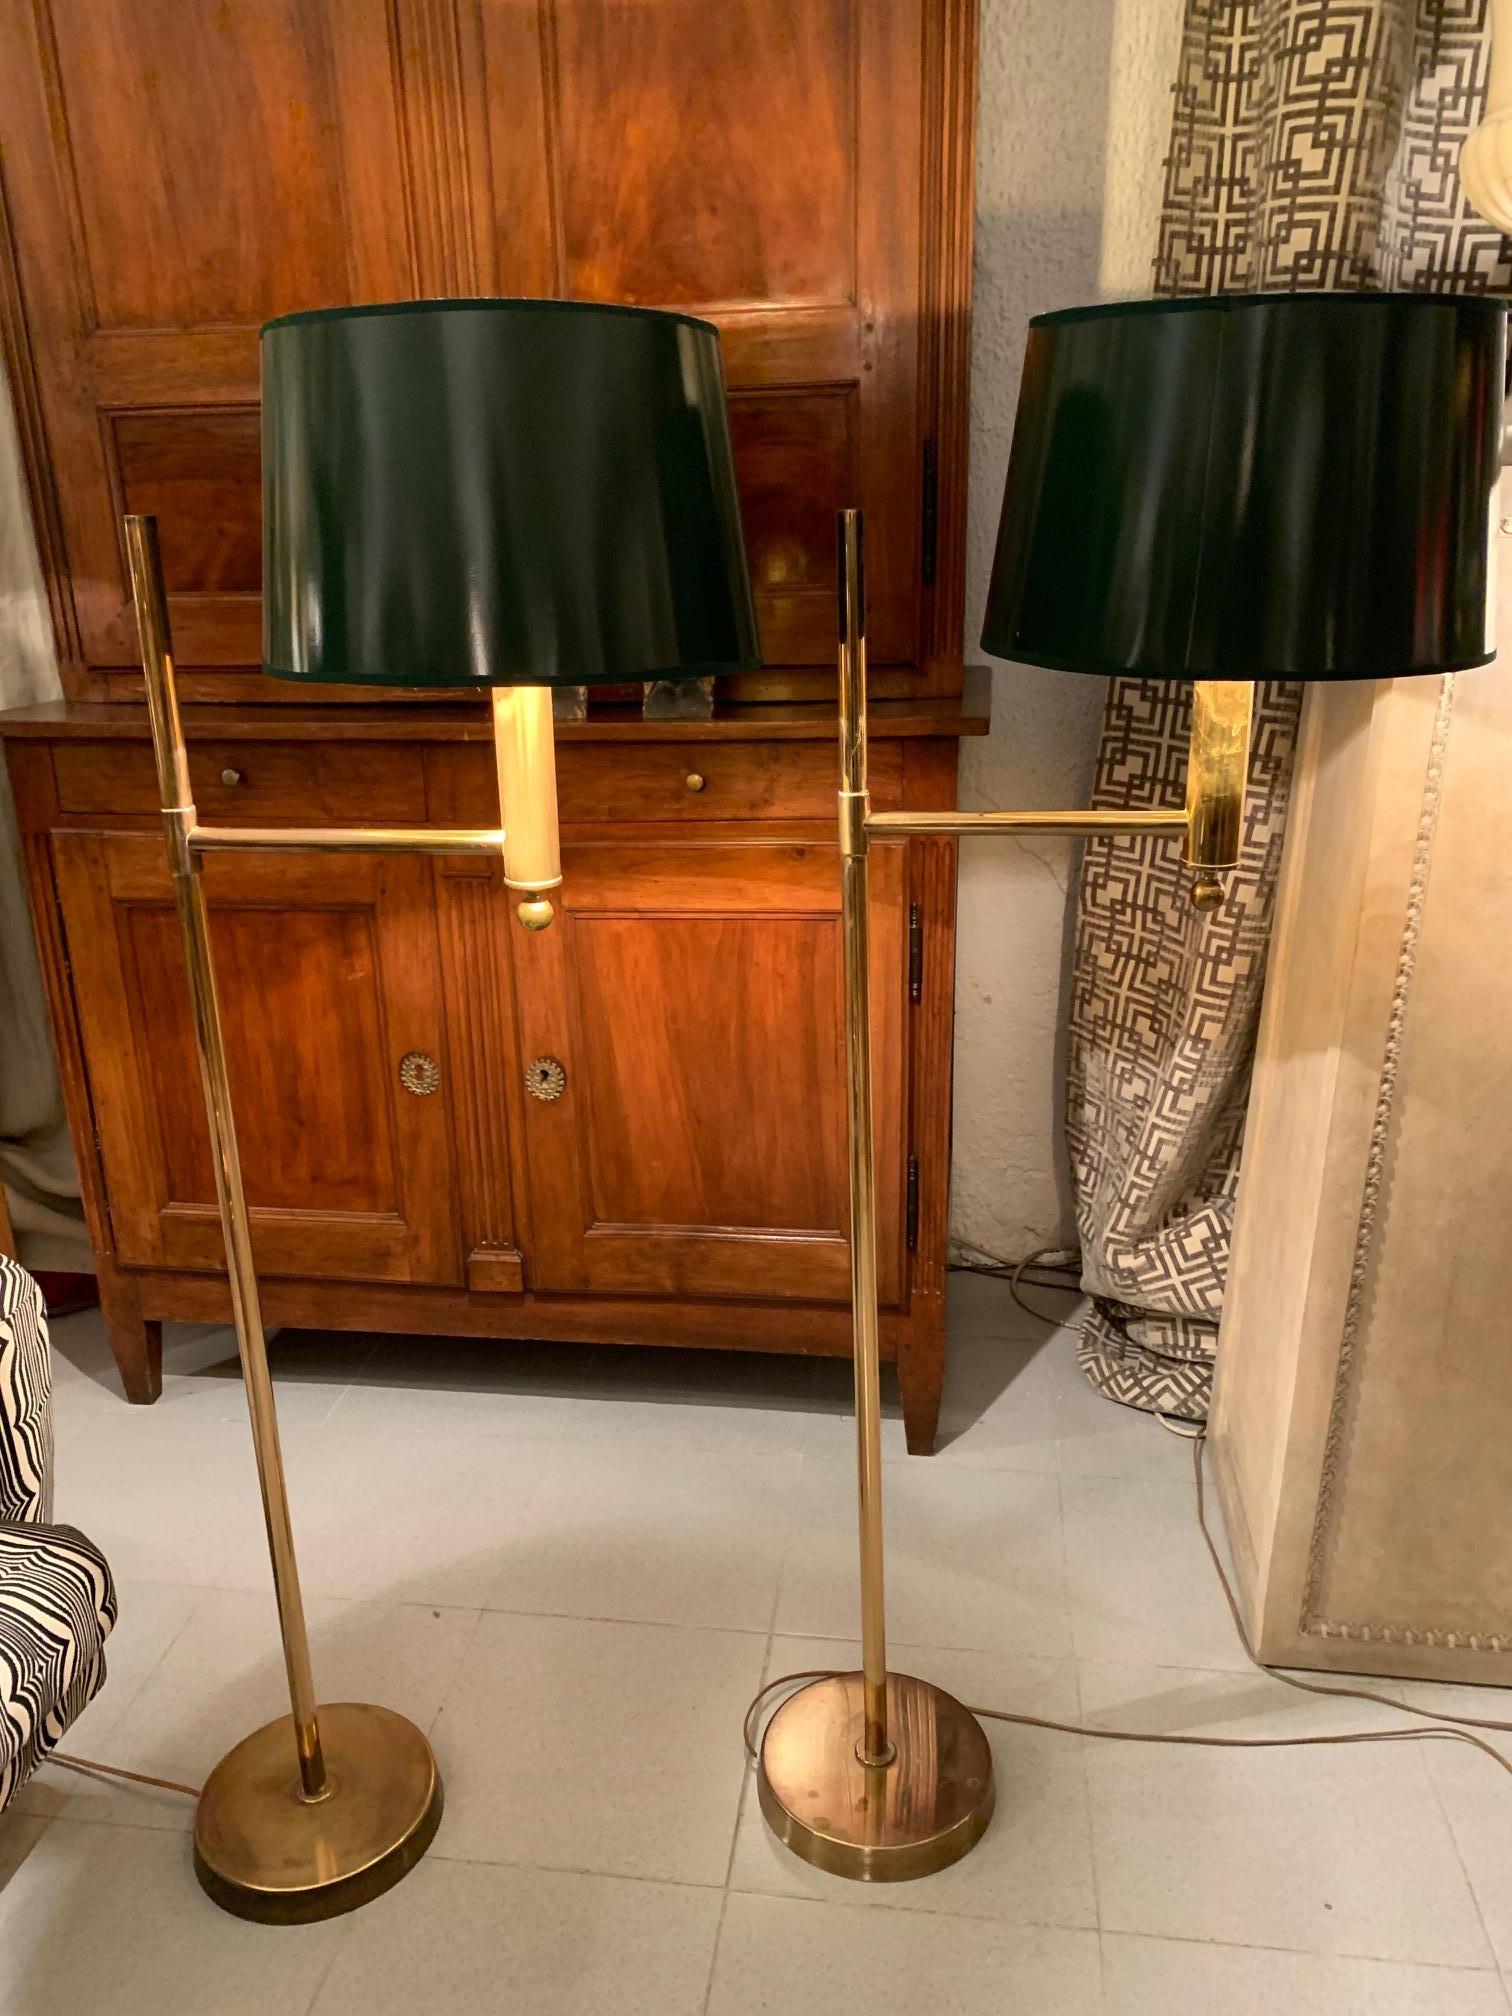 A pair of swedish floor lamps in brass, by Bergboms, the lamps have an arm that supports a small column ending in a ball, which supports the lampshade
in this case the lampshade is in green patent leather and its gold interior.
The lampshades are